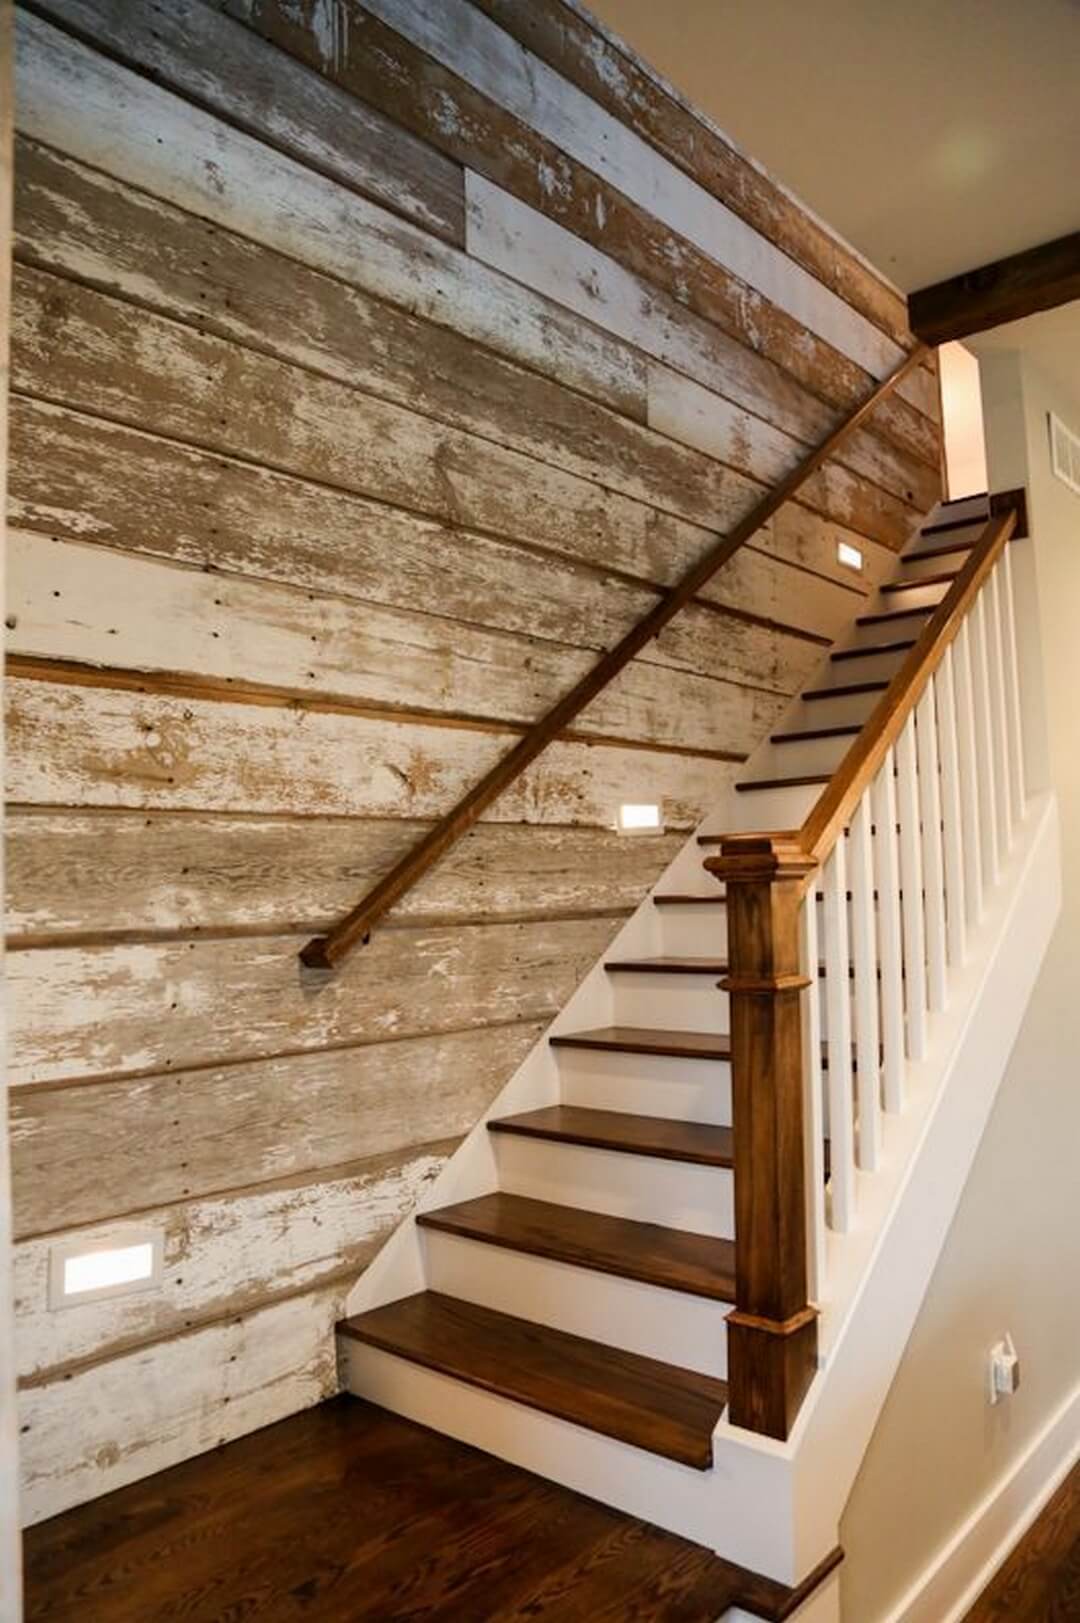 Rustic Paneled Wall Meets Classic Wood Staircase